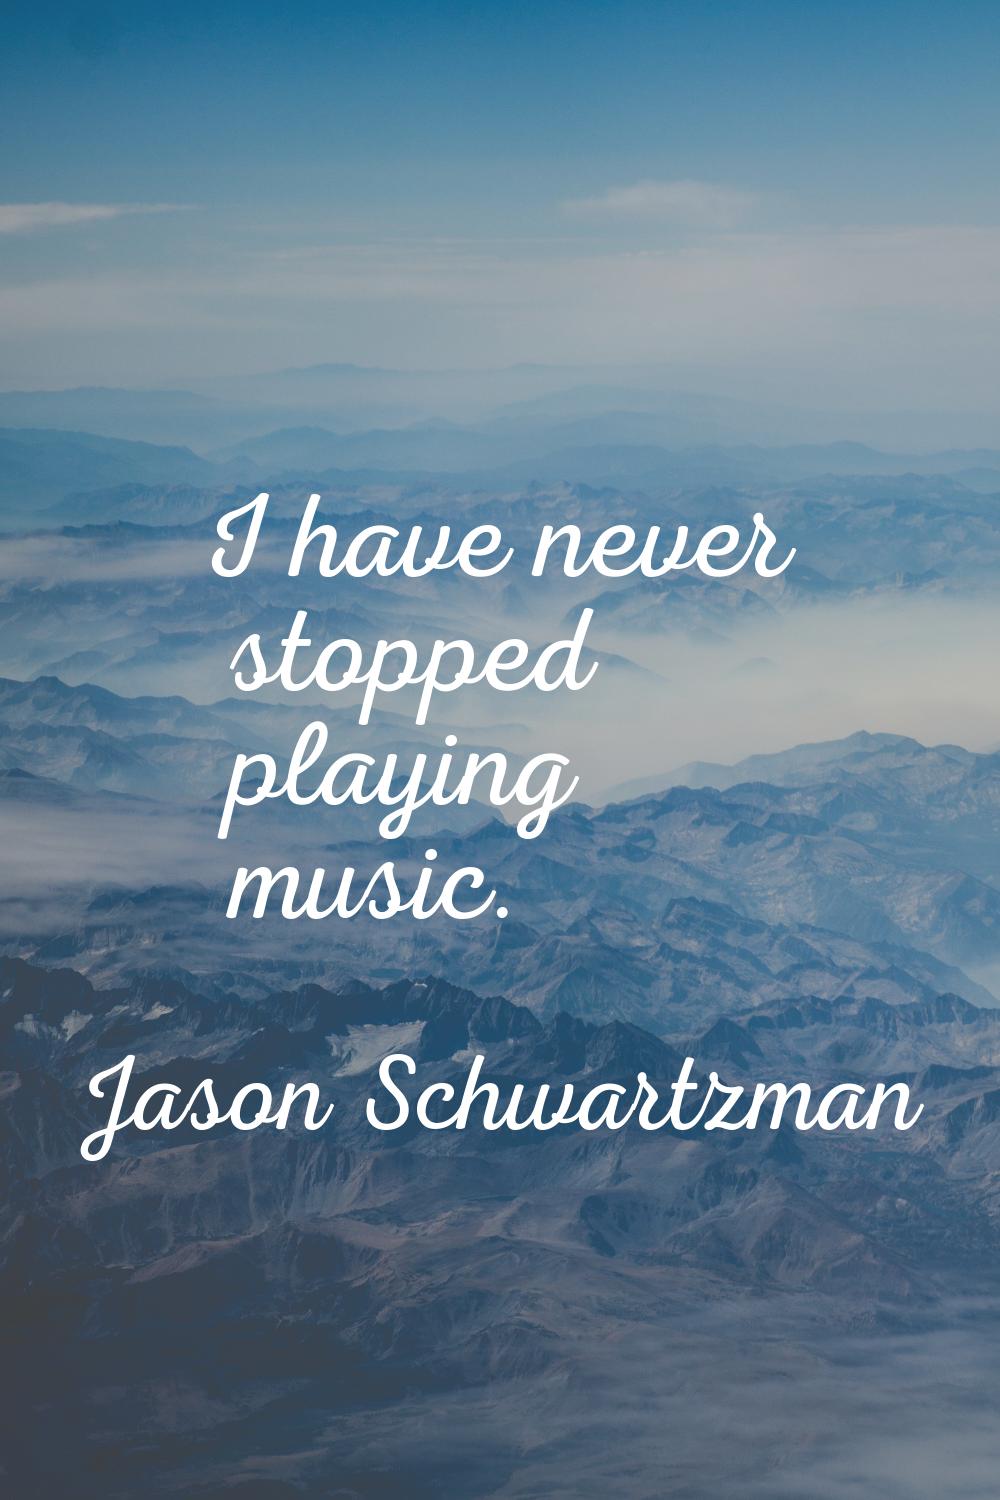 I have never stopped playing music.